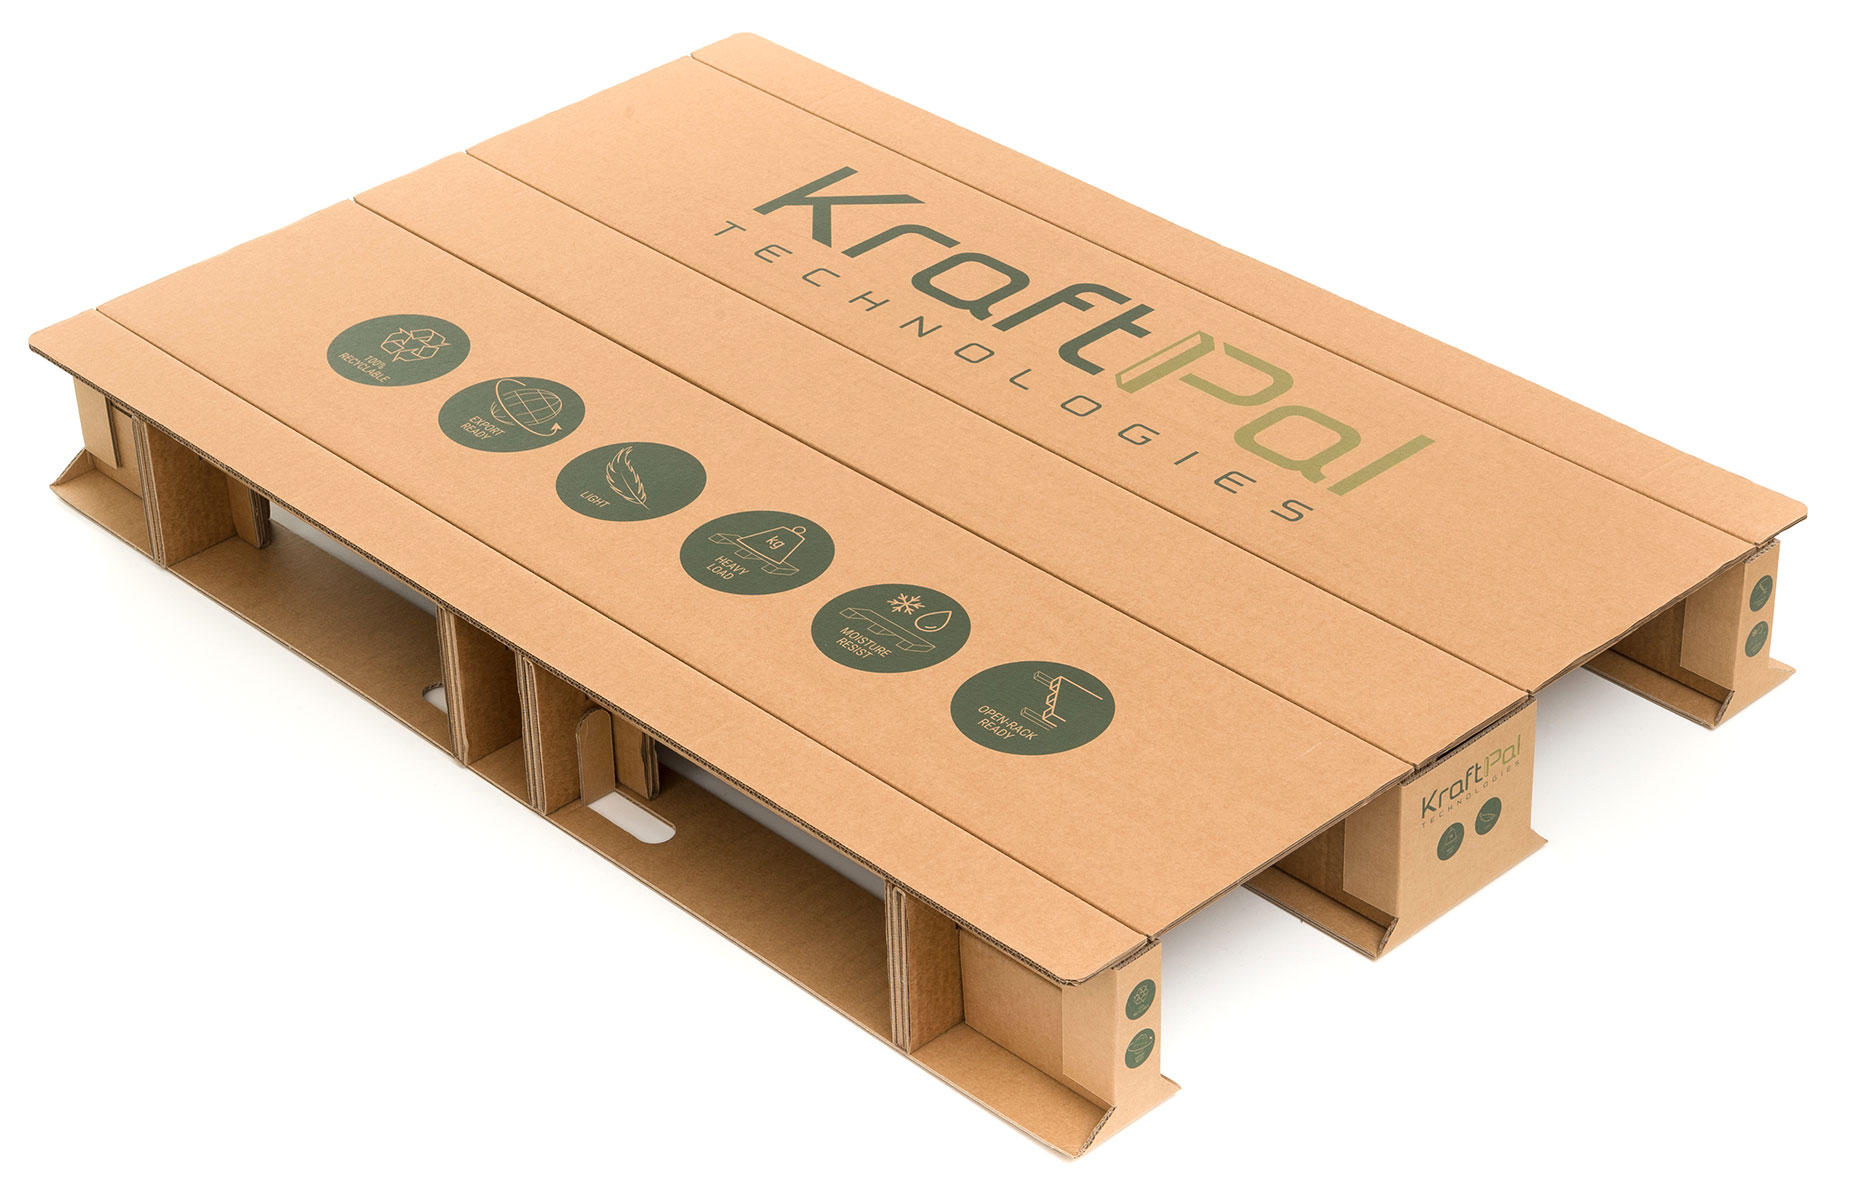 How will the Kraftpal pallet made of corrugated cardboard change the world?